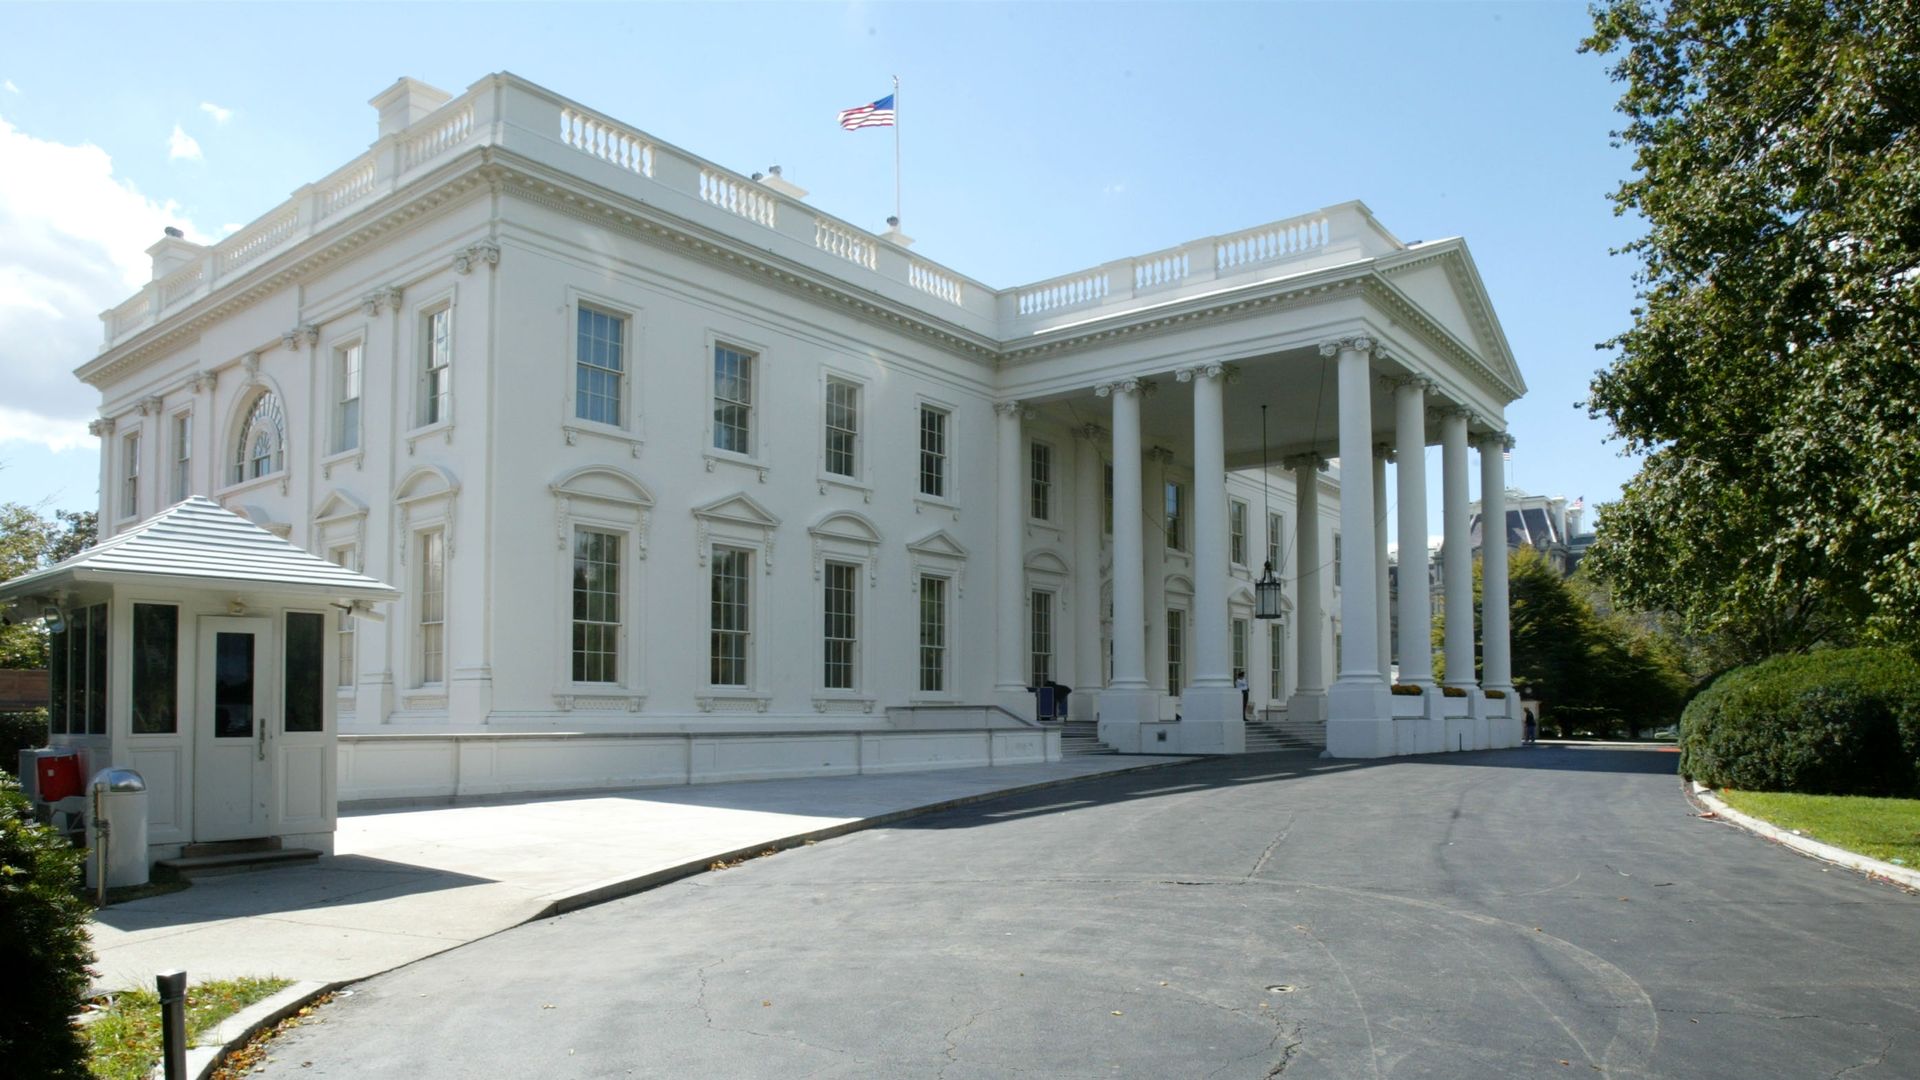 The exterior of the White House building.